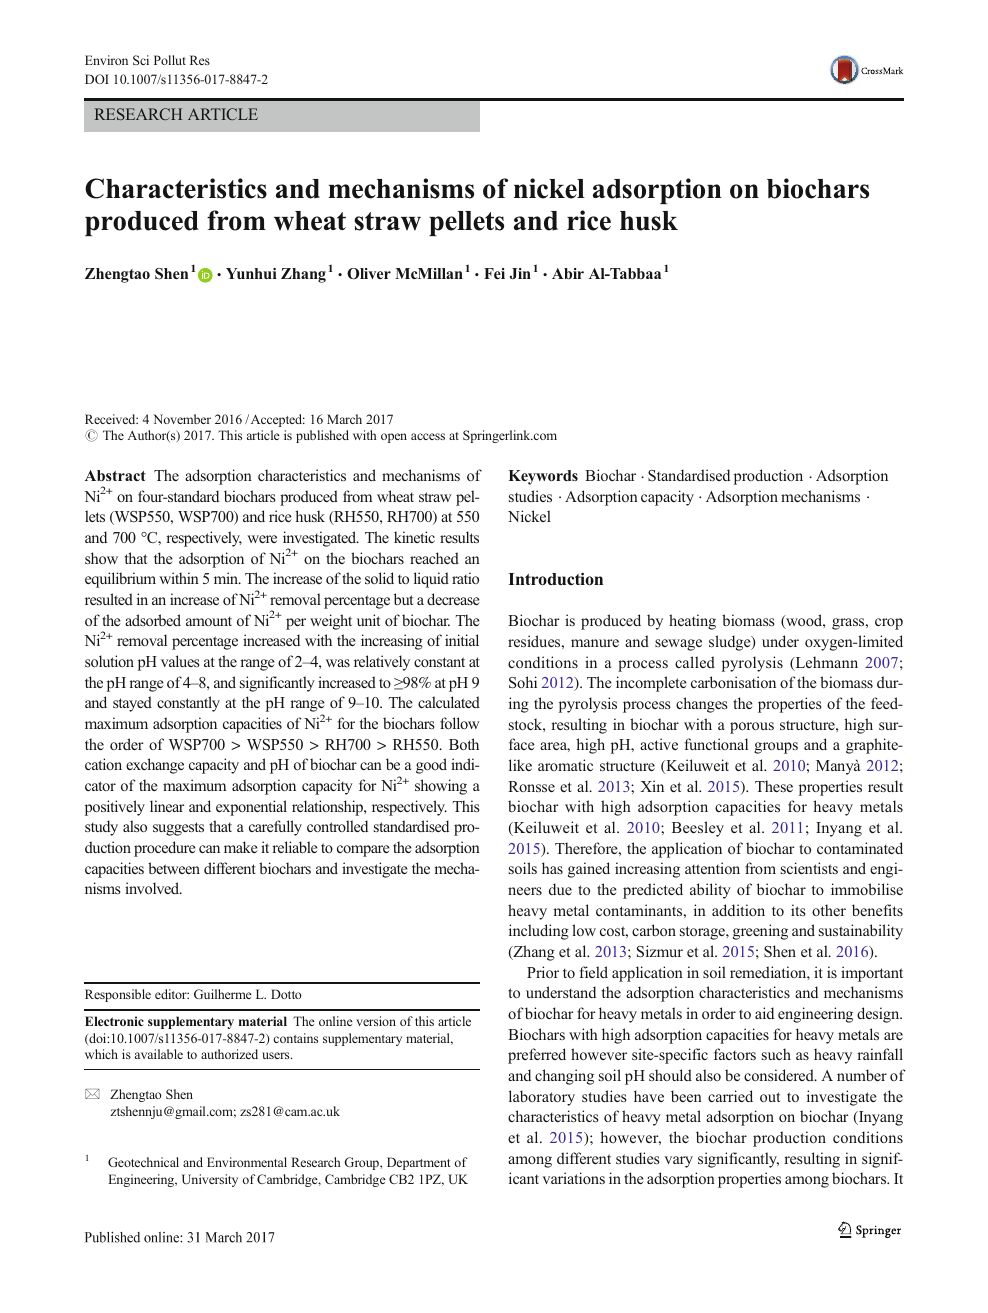 Characteristics And Mechanisms Of Nickel Adsorption On Biochars Produced From Wheat Straw Pellets And Rice Husk Topic Of Research Paper In Nano Technology Download Scholarly Article Pdf And Read For Free On